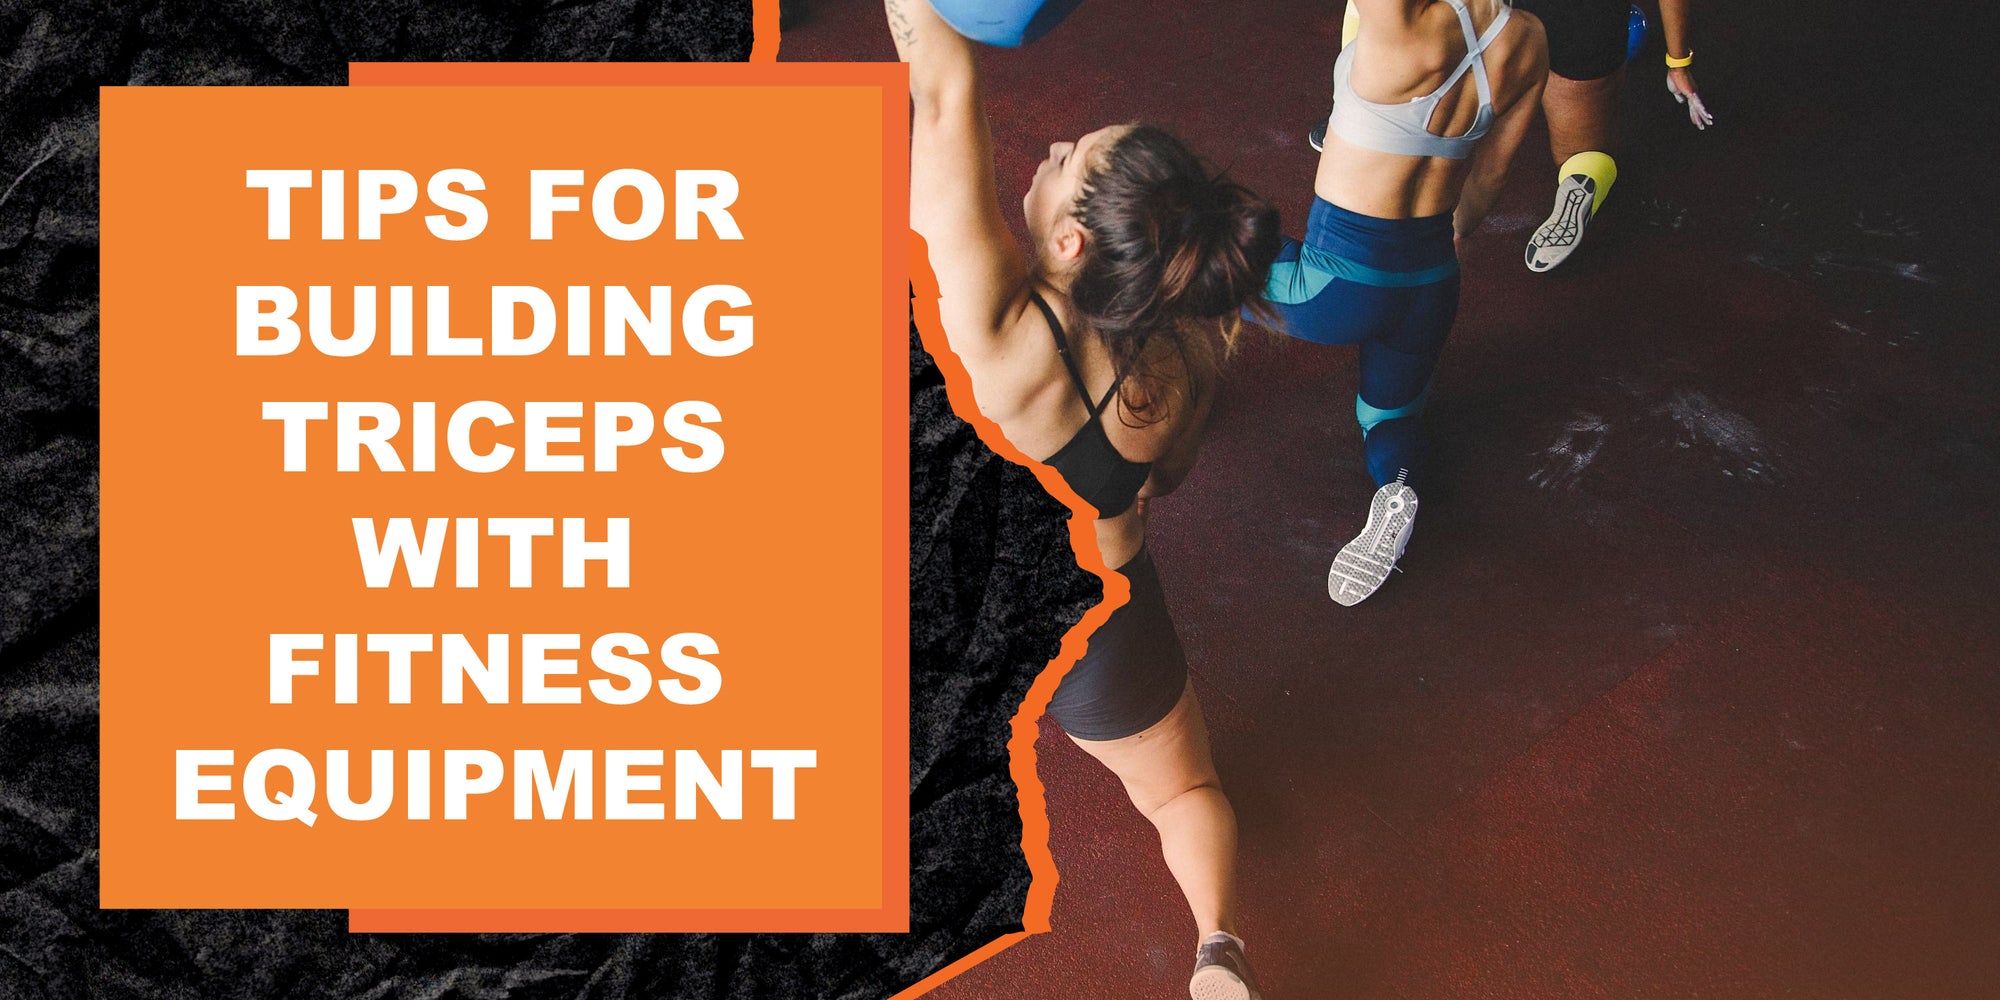 10 Essential Tips for Building Triceps with Fitness Equipment